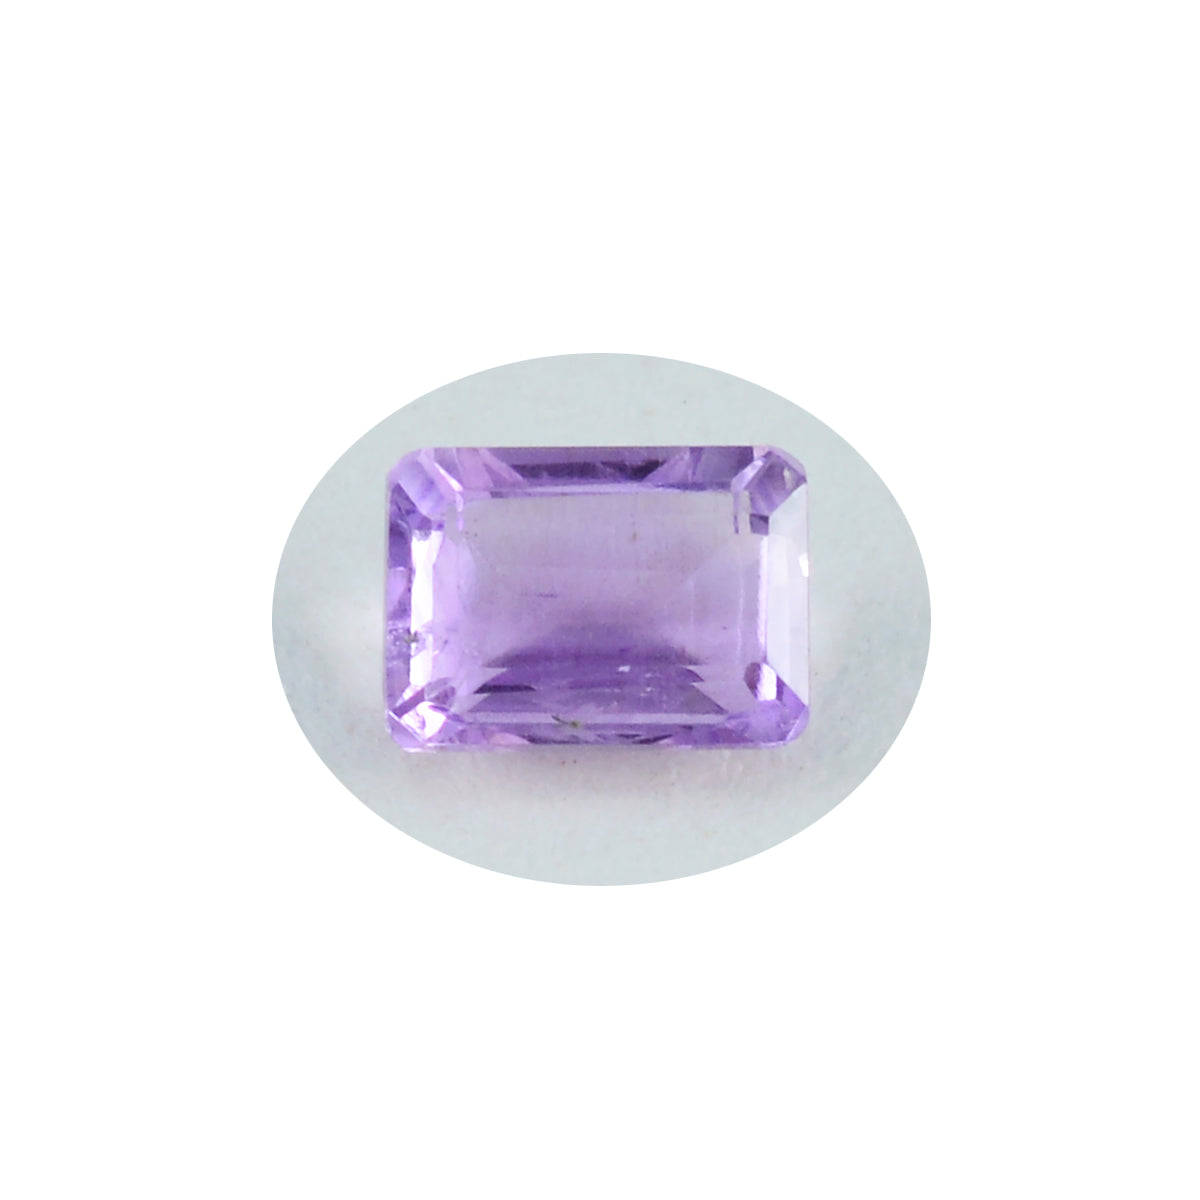 Riyogems 1PC Real Purple Amethyst Faceted 10X14 mm Octagon Shape Nice Quality Loose Stone